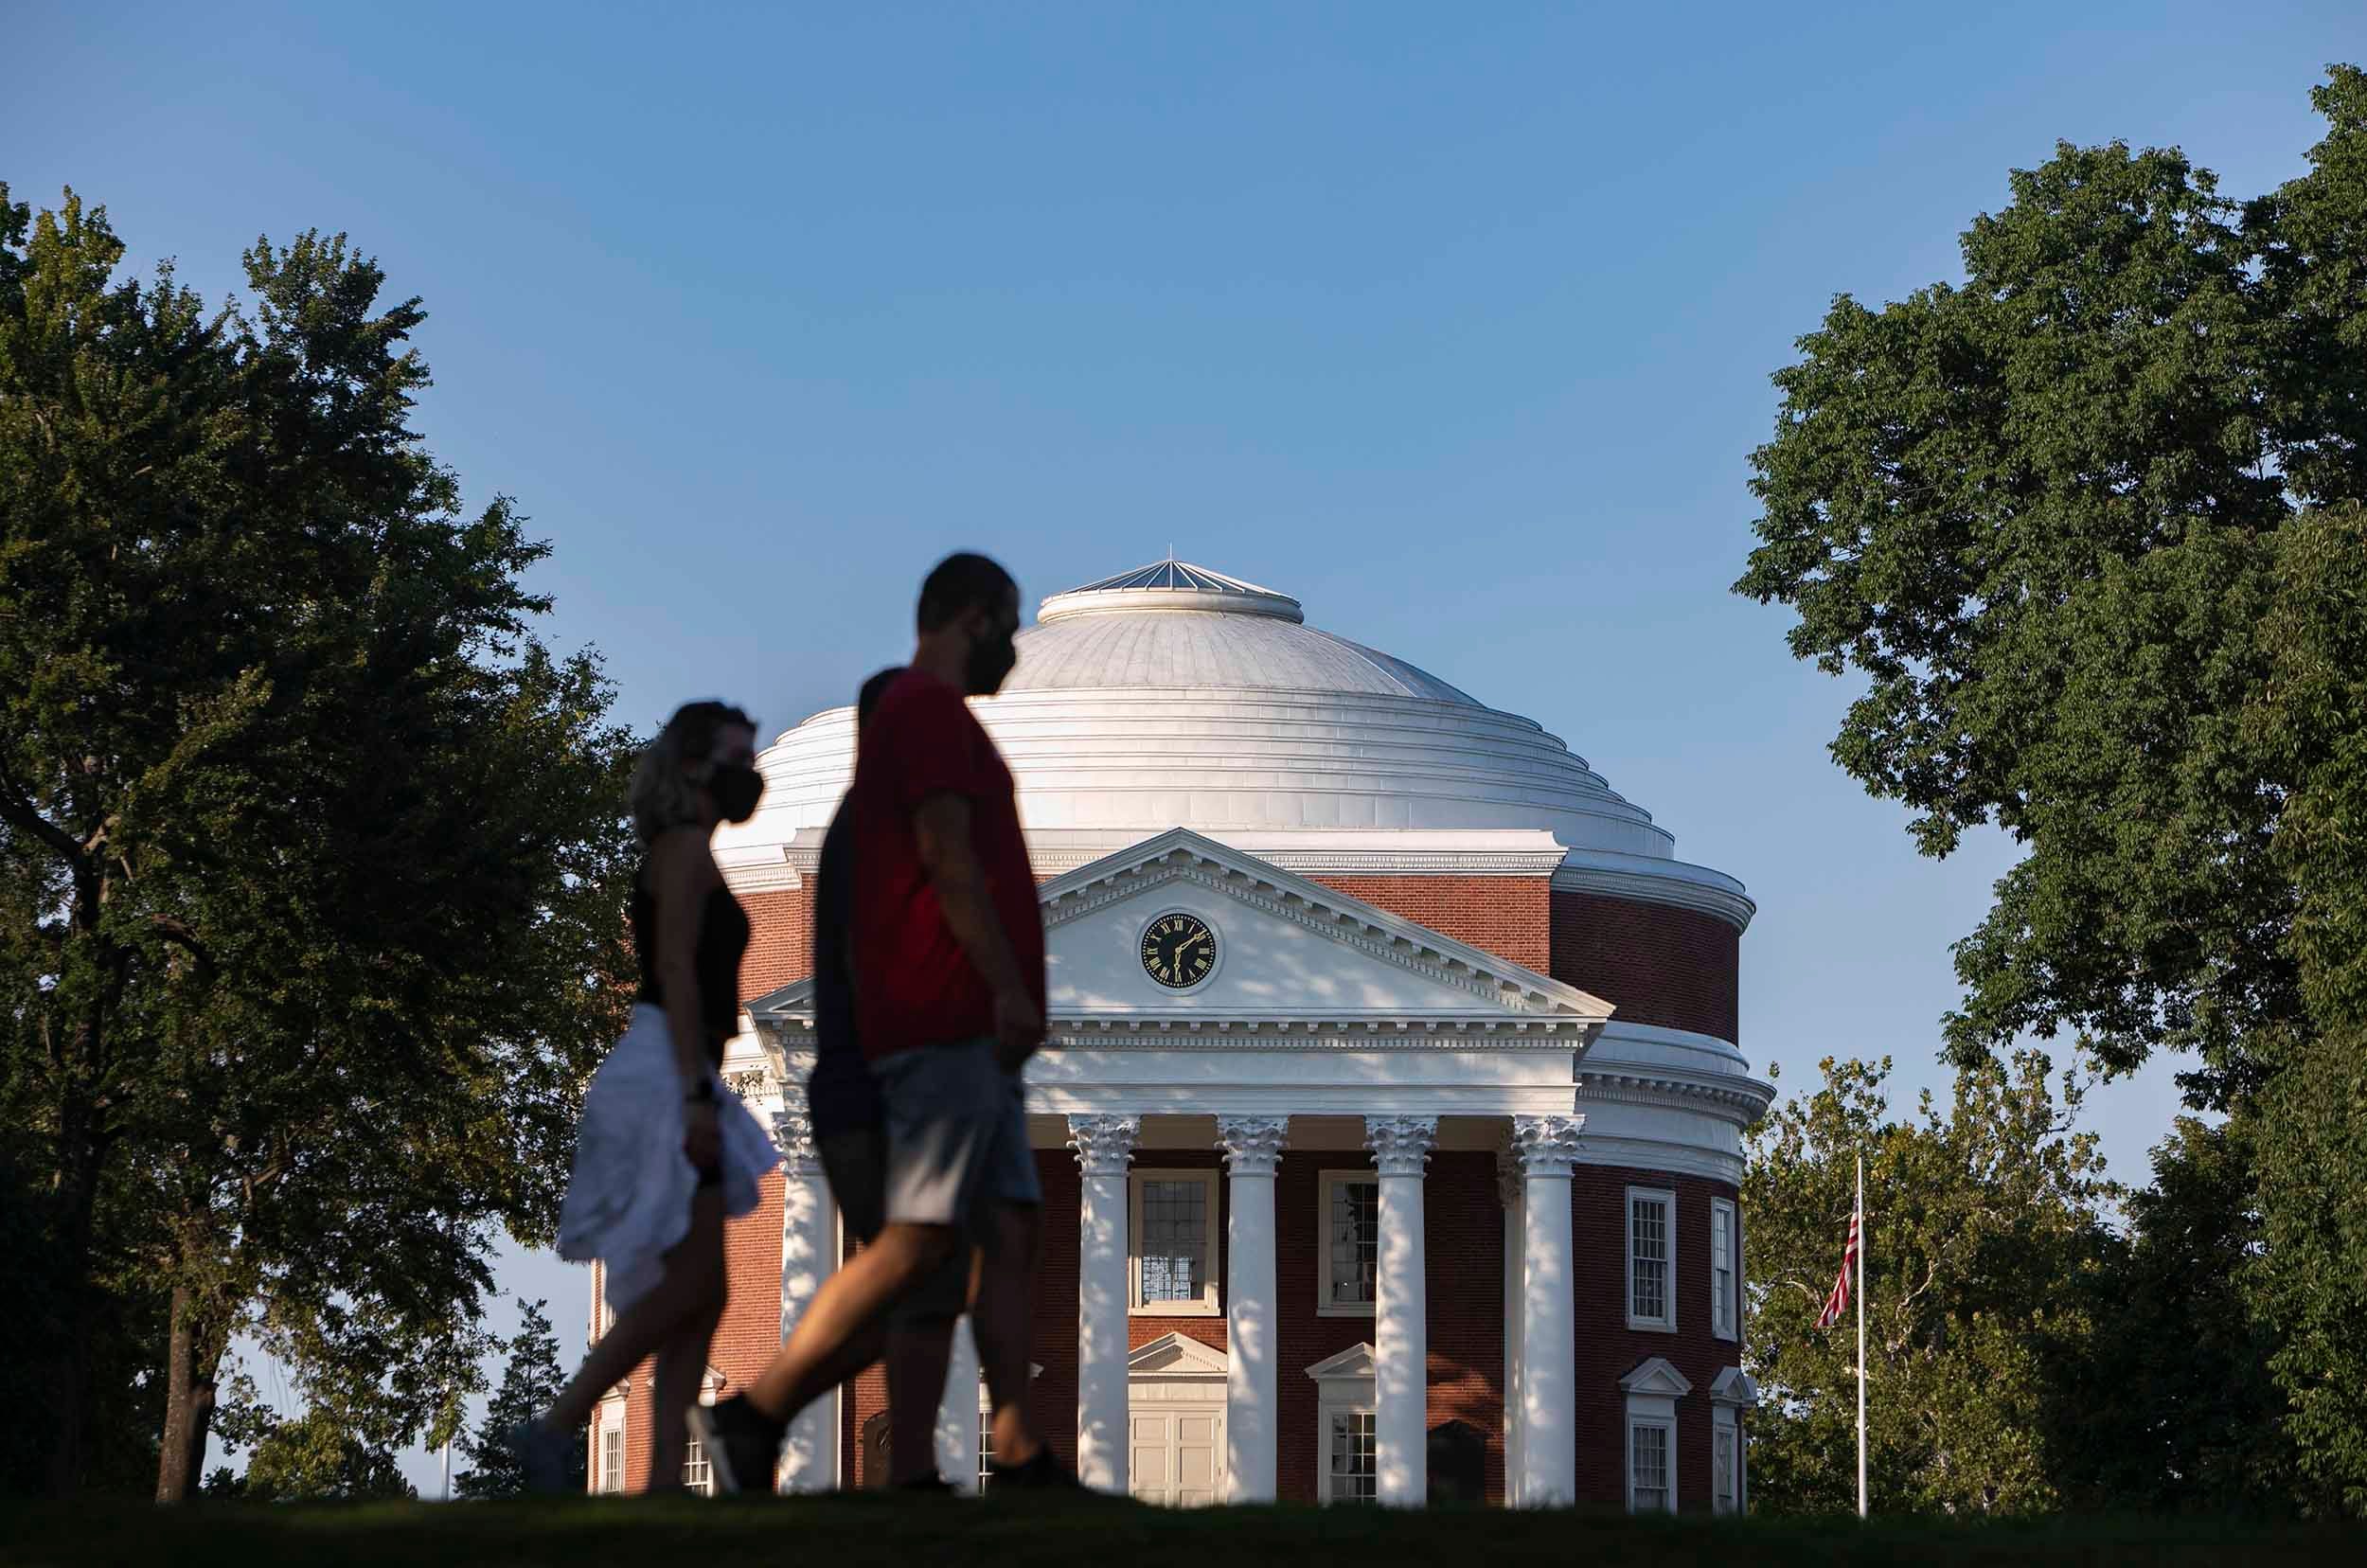 A picture of a building on the campus of the University of Virginia.